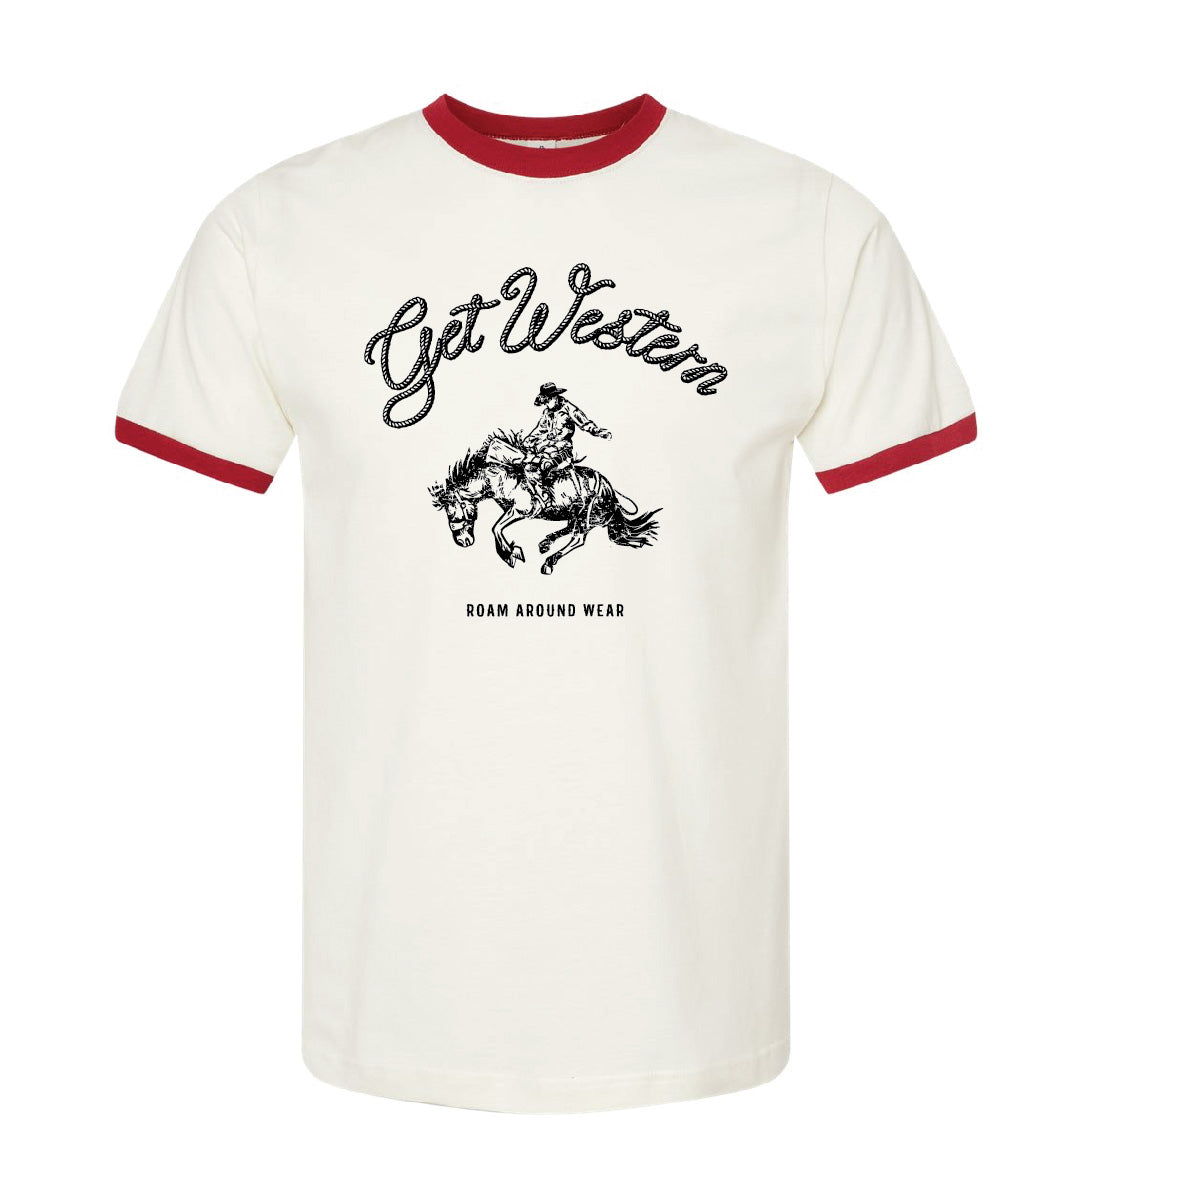 Get Western Cowboy and Rider print in black on a vintage inspired red/white unisex ringer tee. Wyoming tee. Rodeo Tee. Western t-shirt. Roam Around Wear is a Wyoming t-shirt company based out of Gillette, Wyoming